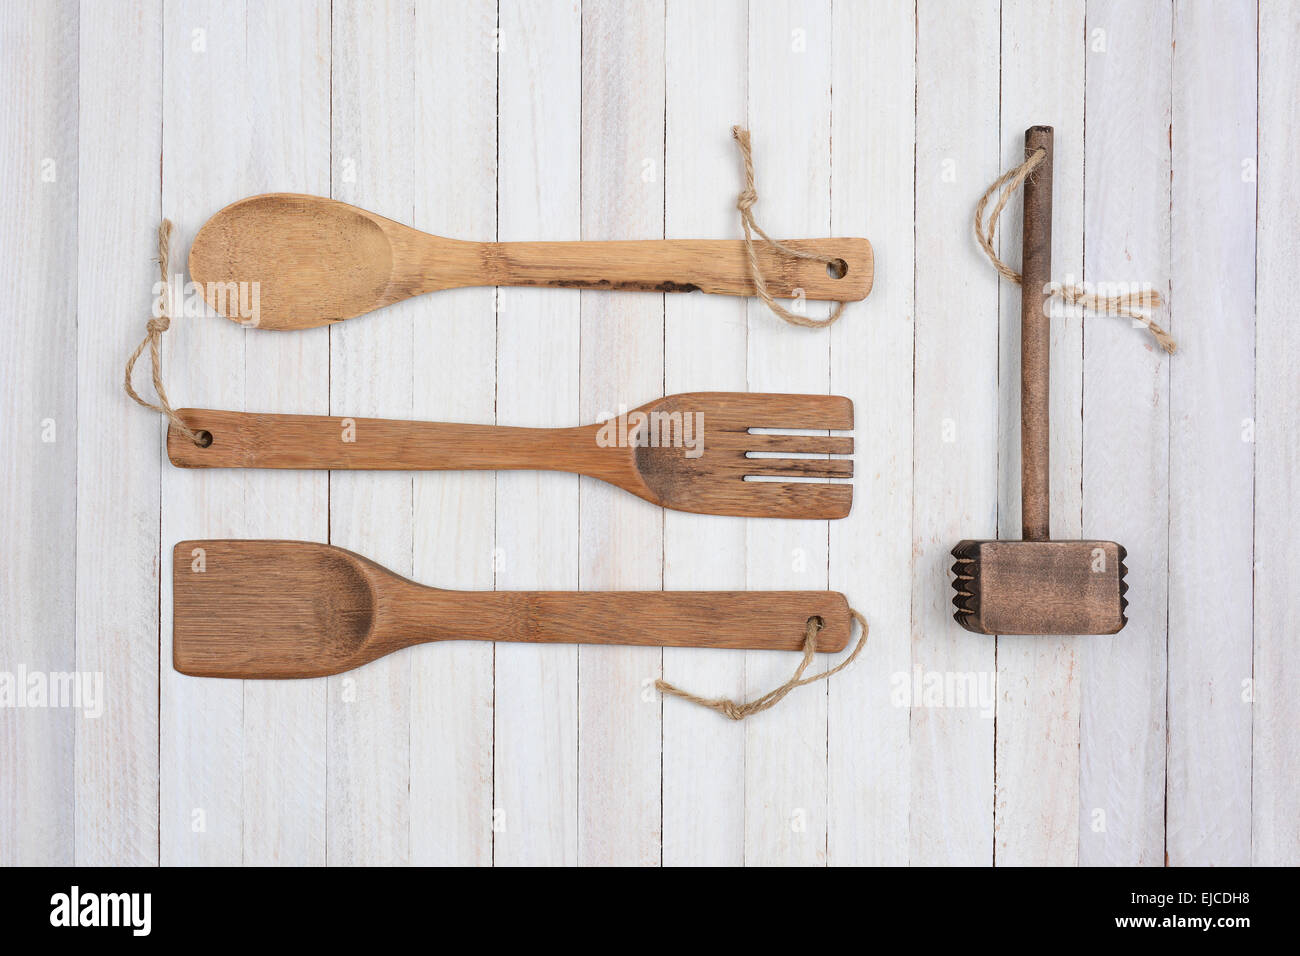 Overhead shot of four wooden kitchen utensils on a rustic white wood table. Items are: spoon, fork, spatula, and a mallet. Stock Photo